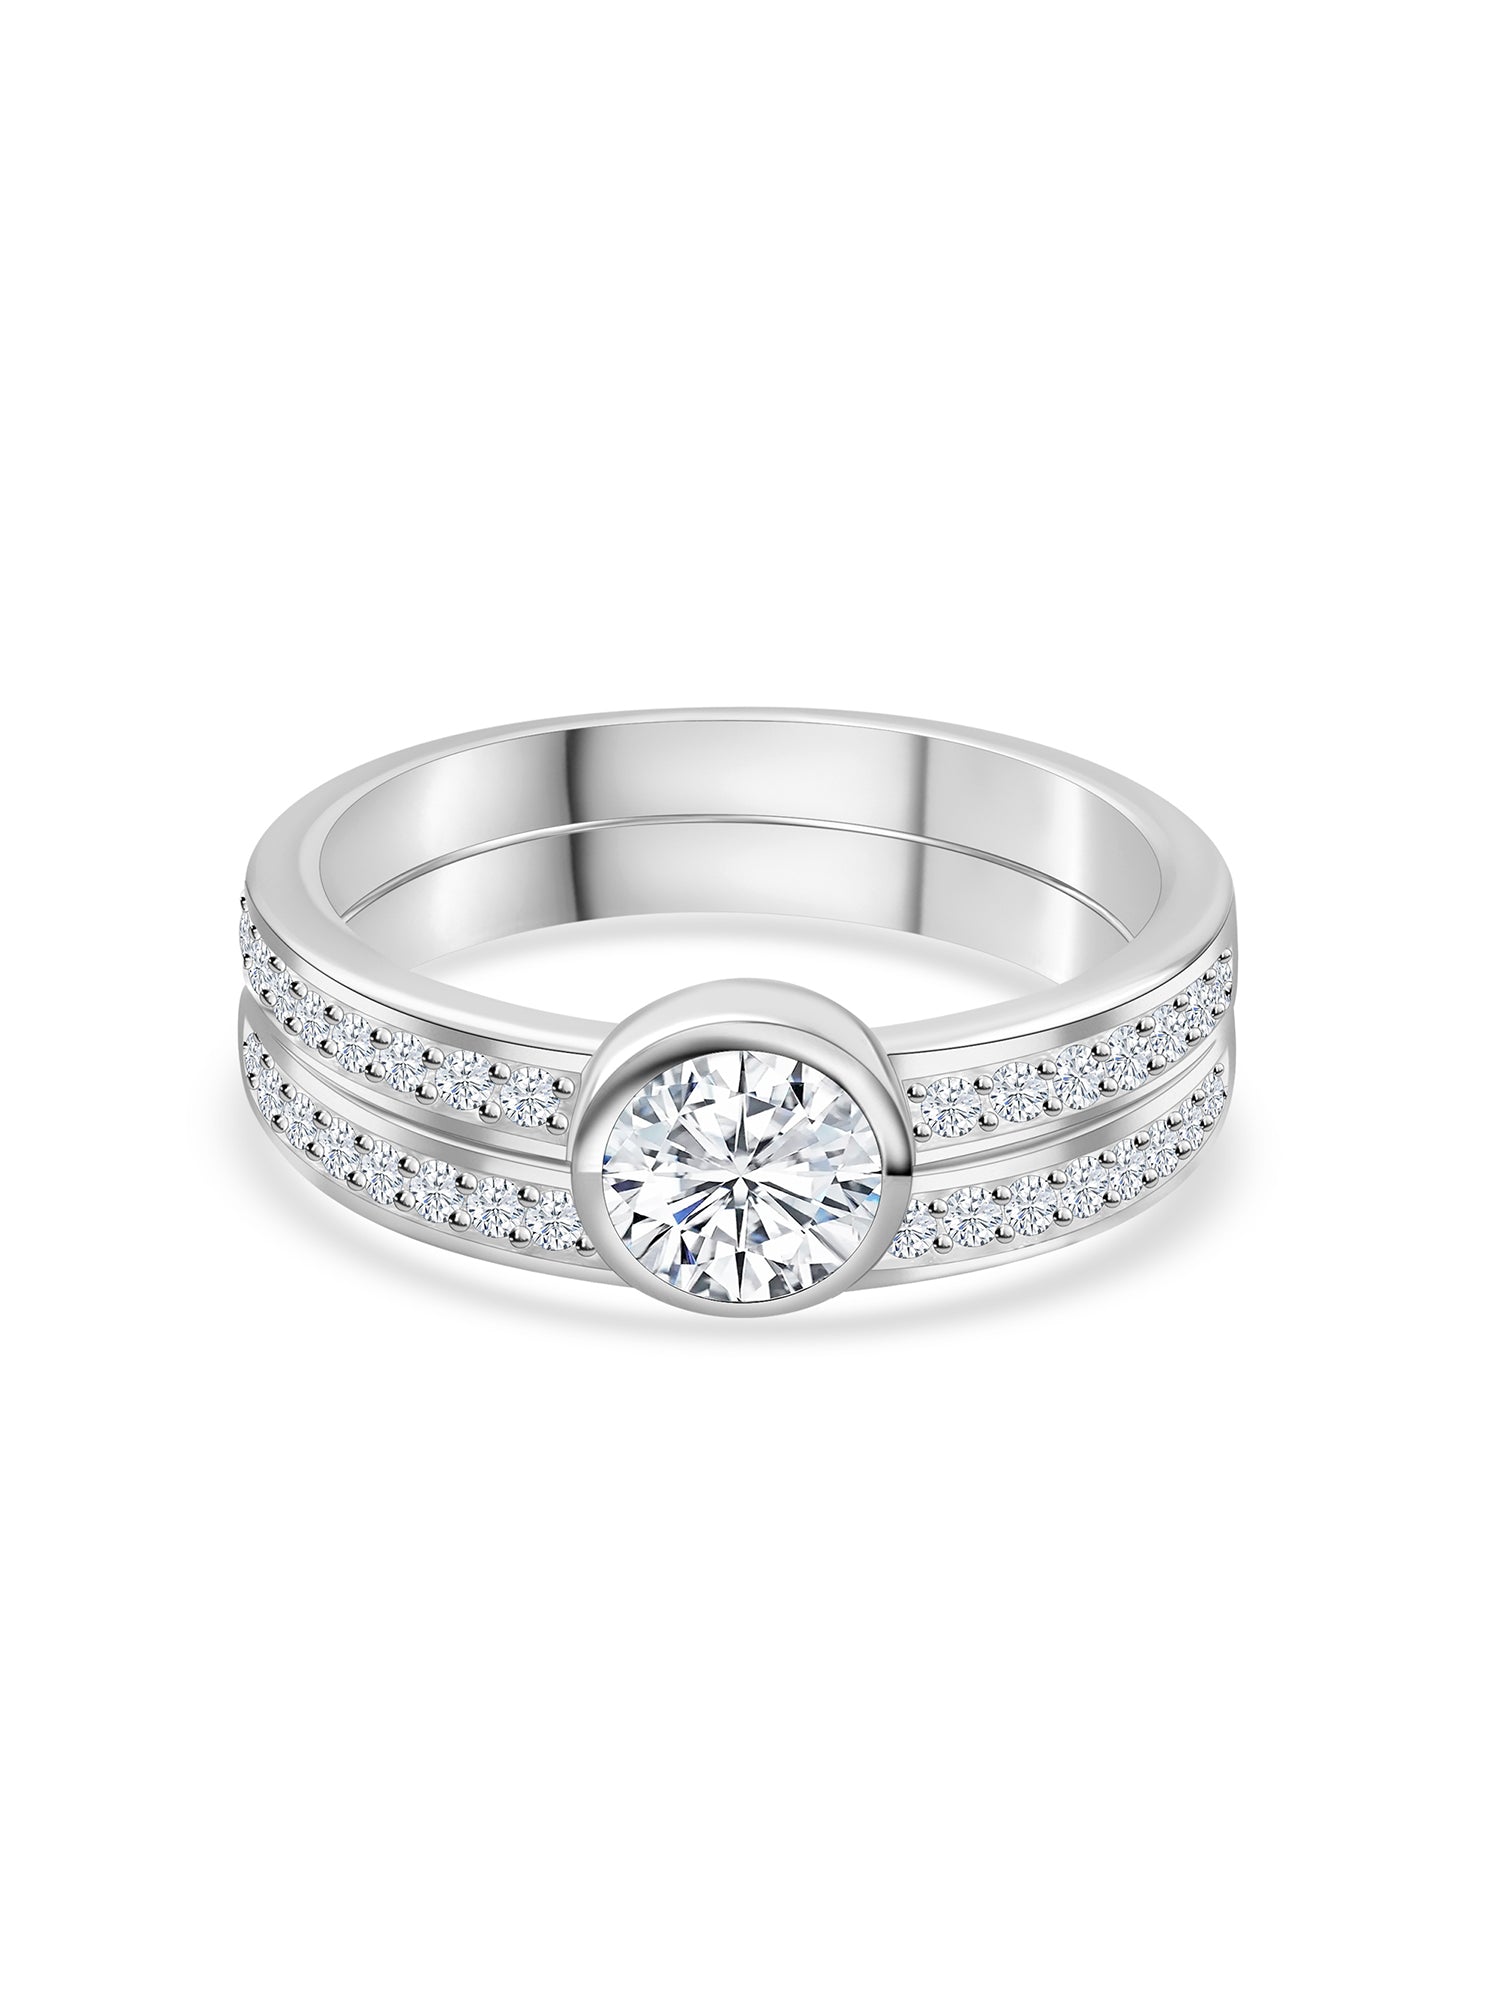 1 CARAT AMERICAN DIAMOND SOLITAIRE RING WITH A BAND-1